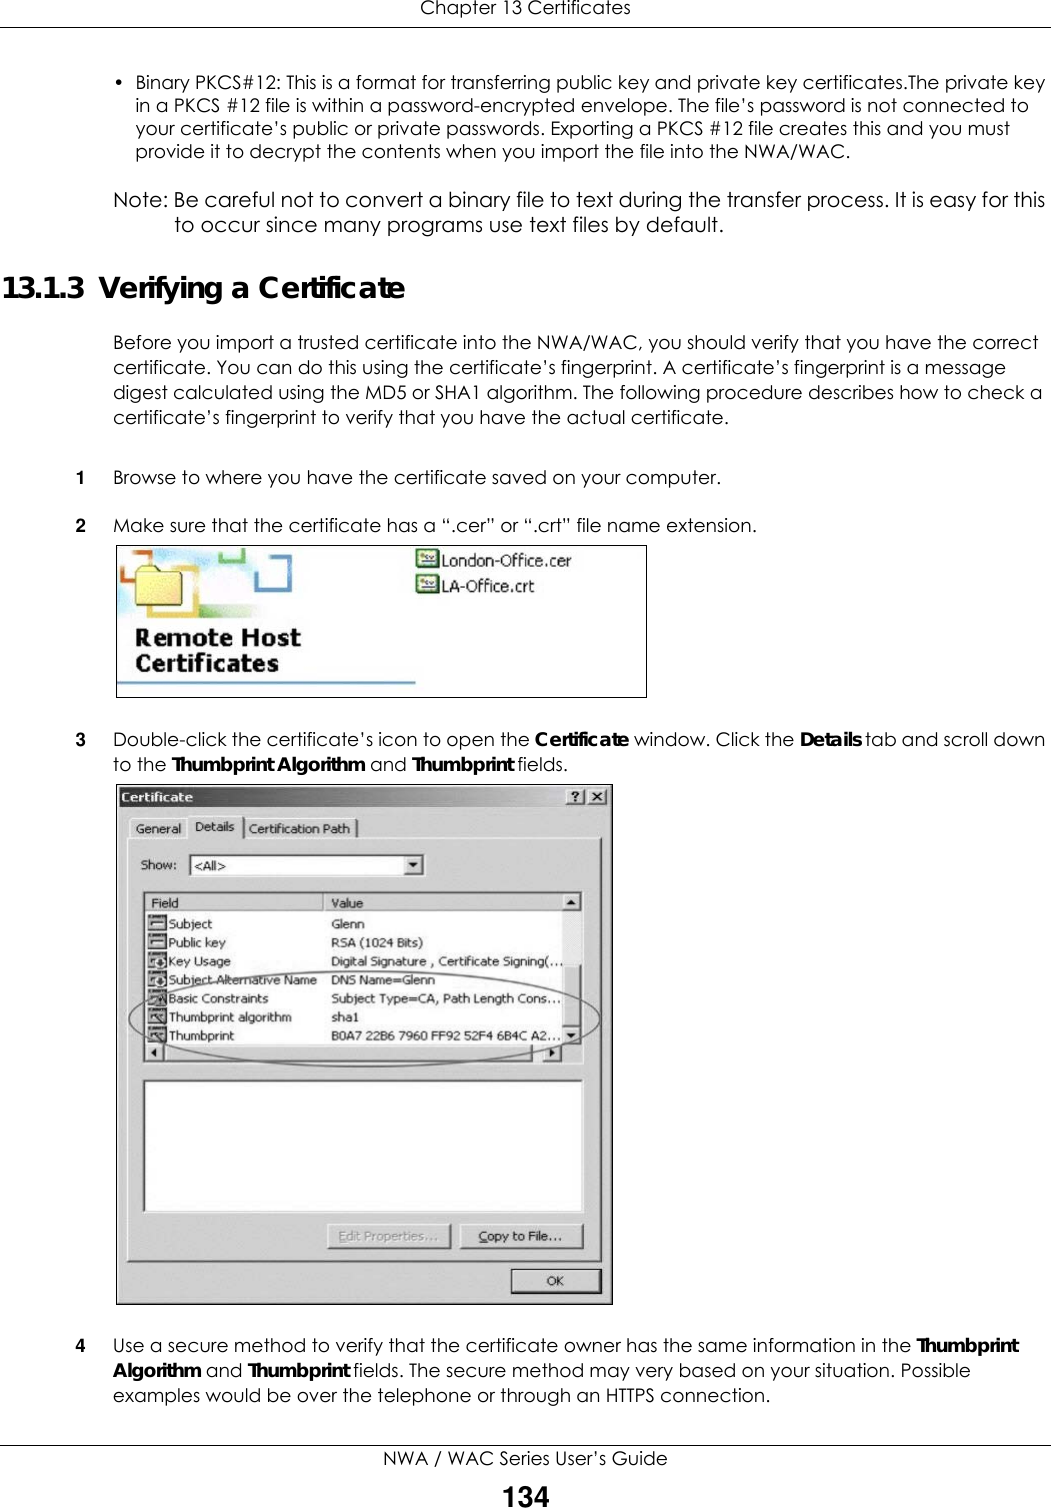 Chapter 13 CertificatesNWA / WAC Series User’s Guide134• Binary PKCS#12: This is a format for transferring public key and private key certificates.The private key in a PKCS #12 file is within a password-encrypted envelope. The file’s password is not connected to your certificate’s public or private passwords. Exporting a PKCS #12 file creates this and you must provide it to decrypt the contents when you import the file into the NWA/WAC. Note: Be careful not to convert a binary file to text during the transfer process. It is easy for this to occur since many programs use text files by default. 13.1.3  Verifying a CertificateBefore you import a trusted certificate into the NWA/WAC, you should verify that you have the correct certificate. You can do this using the certificate’s fingerprint. A certificate’s fingerprint is a message digest calculated using the MD5 or SHA1 algorithm. The following procedure describes how to check a certificate’s fingerprint to verify that you have the actual certificate. 1Browse to where you have the certificate saved on your computer. 2Make sure that the certificate has a “.cer” or “.crt” file name extension.3Double-click the certificate’s icon to open the Certificate window. Click the Details tab and scroll down to the Thumbprint Algorithm and Thumbprint fields. 4Use a secure method to verify that the certificate owner has the same information in the Thumbprint Algorithm and Thumbprint fields. The secure method may very based on your situation. Possible examples would be over the telephone or through an HTTPS connection. 